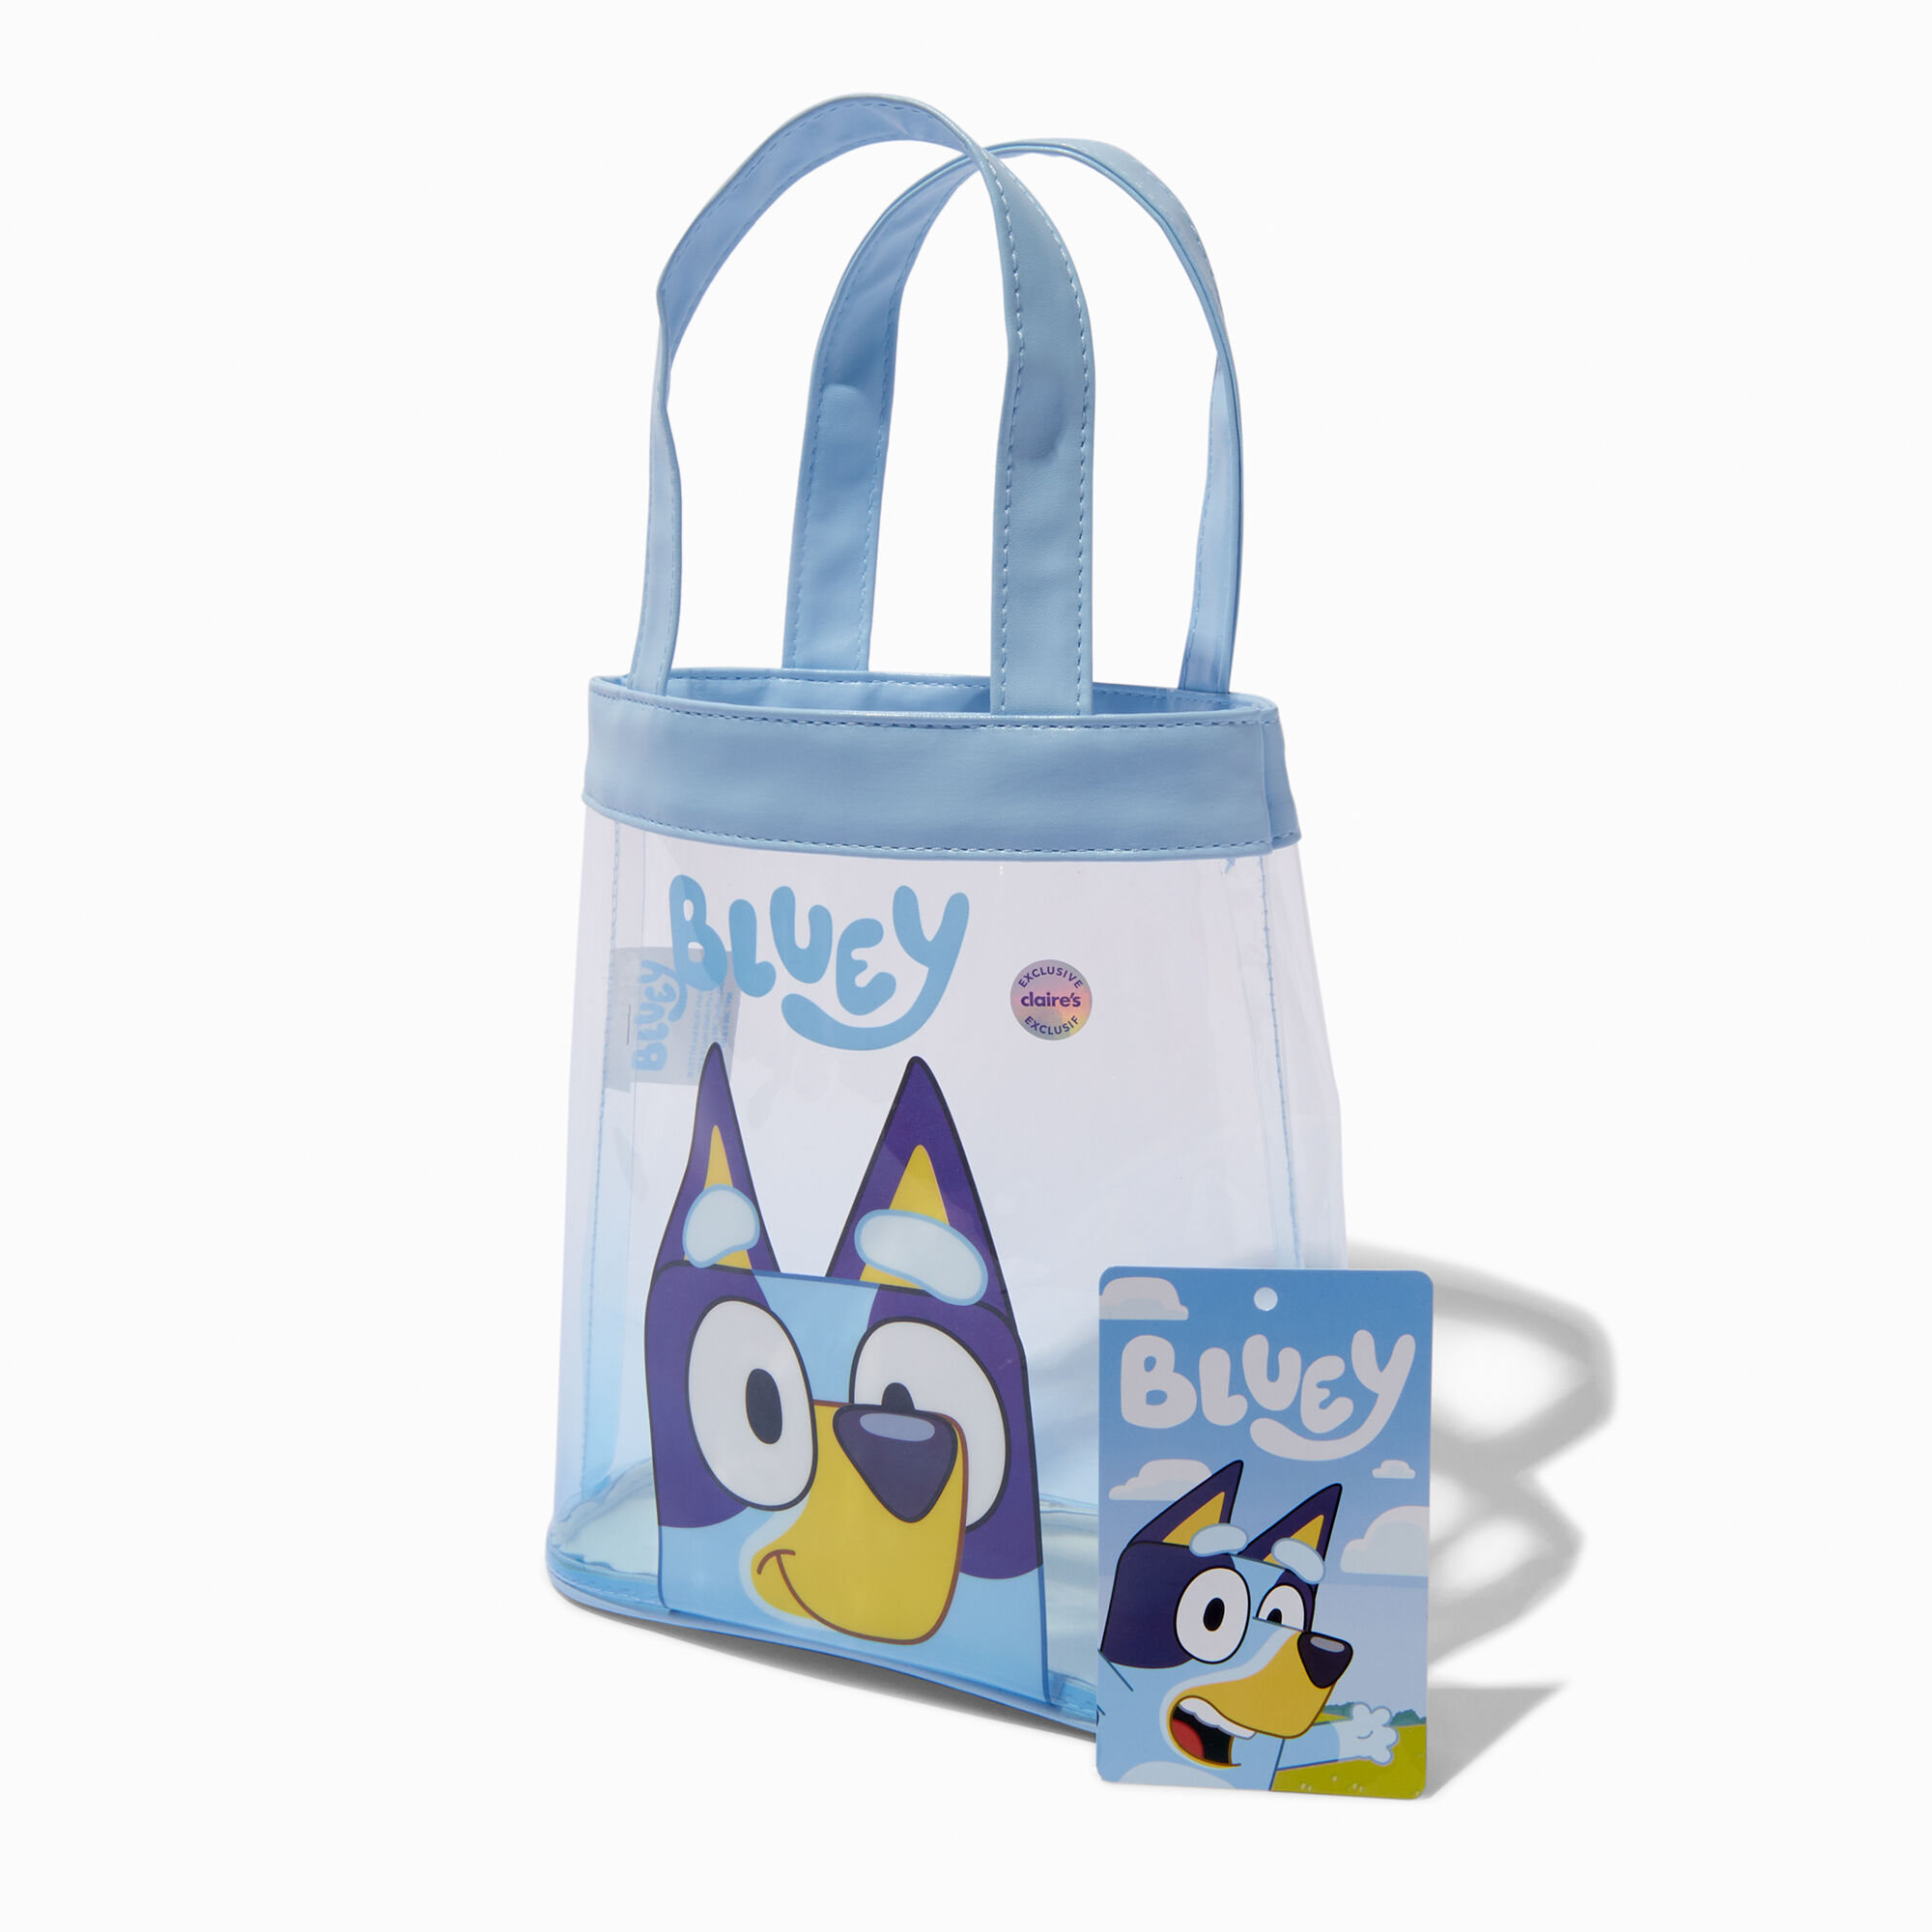 View Bluey Claires Exclusive Jelly Tote Bag information